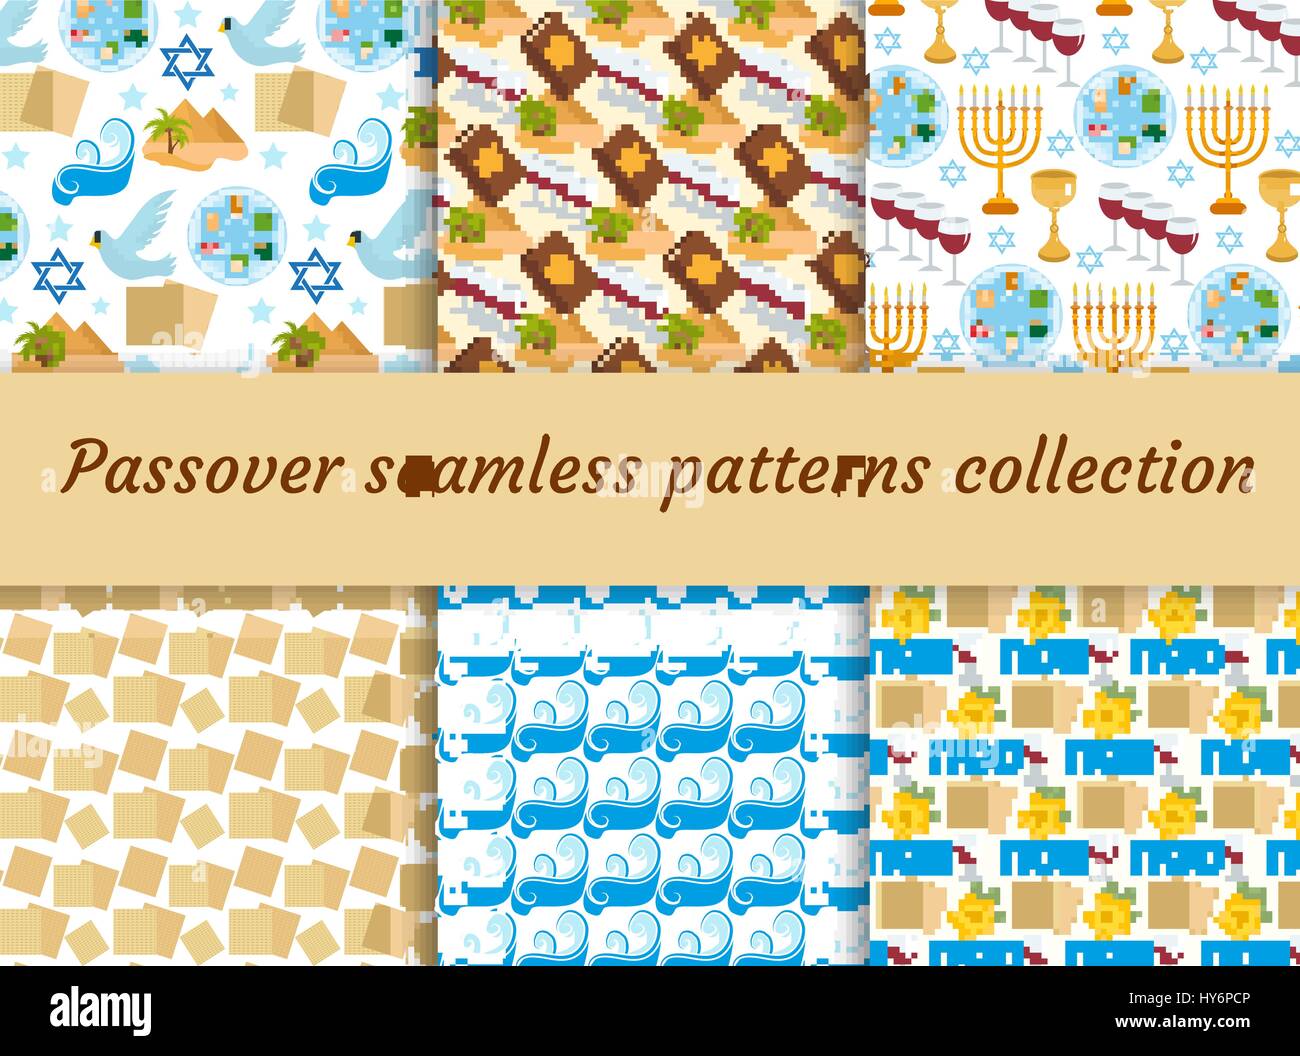 Passover seamless pattern collection. Pesach endless background, texture. Jewish holiday backdrop. Vector illustration. Stock Vector